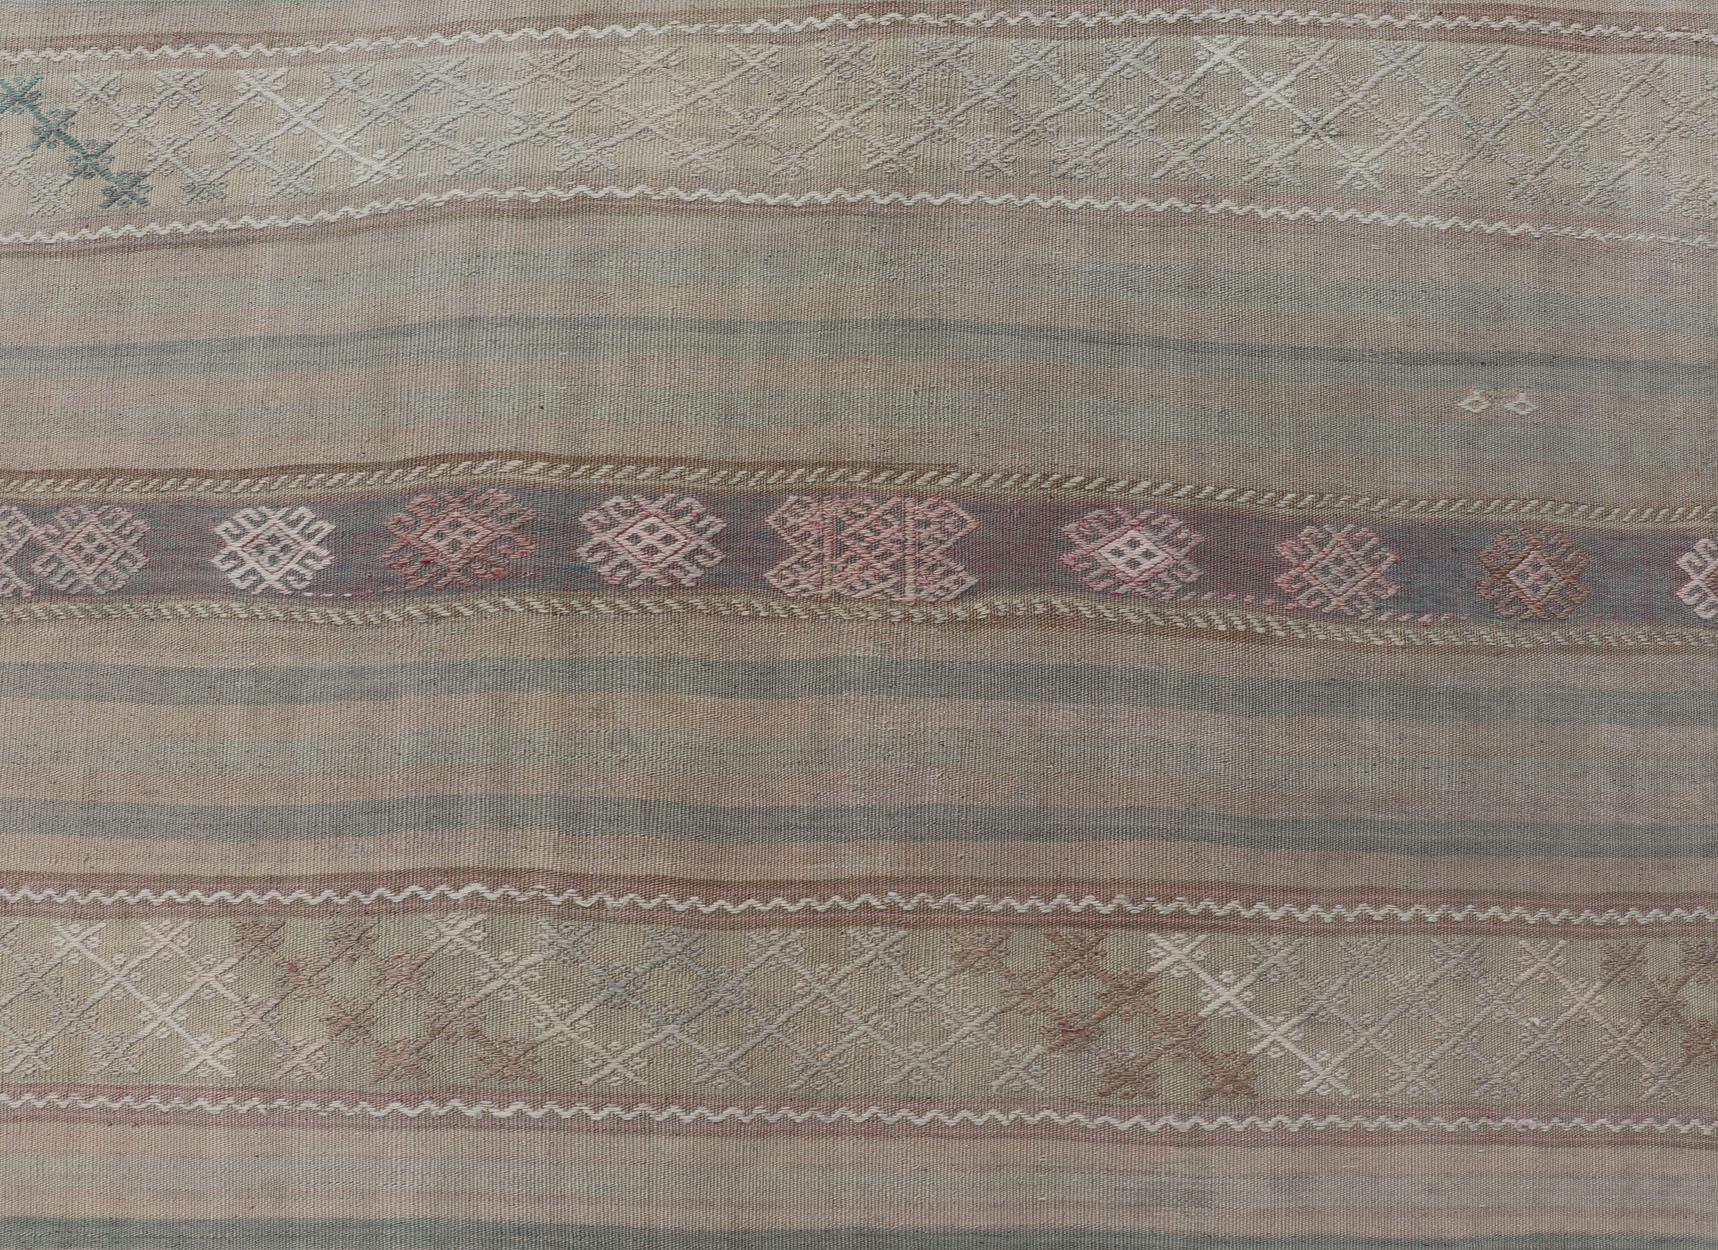 Flat-Weave Turkish Kilim with Embroideries in Earthy Tones and Hints of Pink For Sale 3